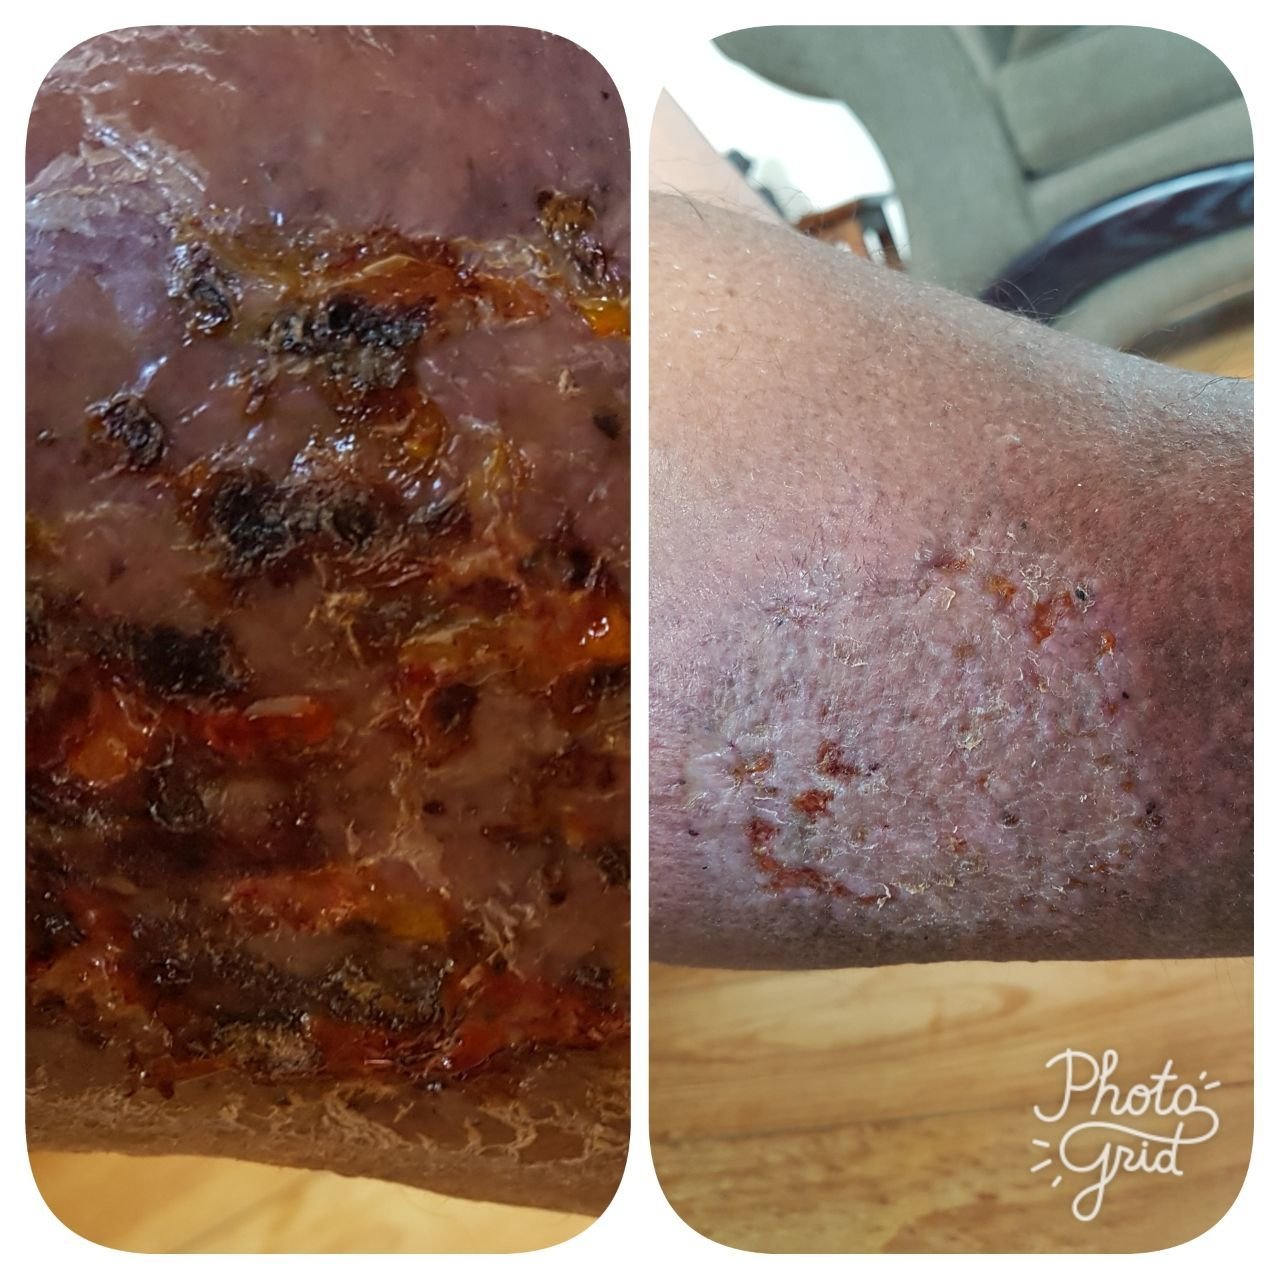 man with cellulitis on his leg, before and after treatment photos